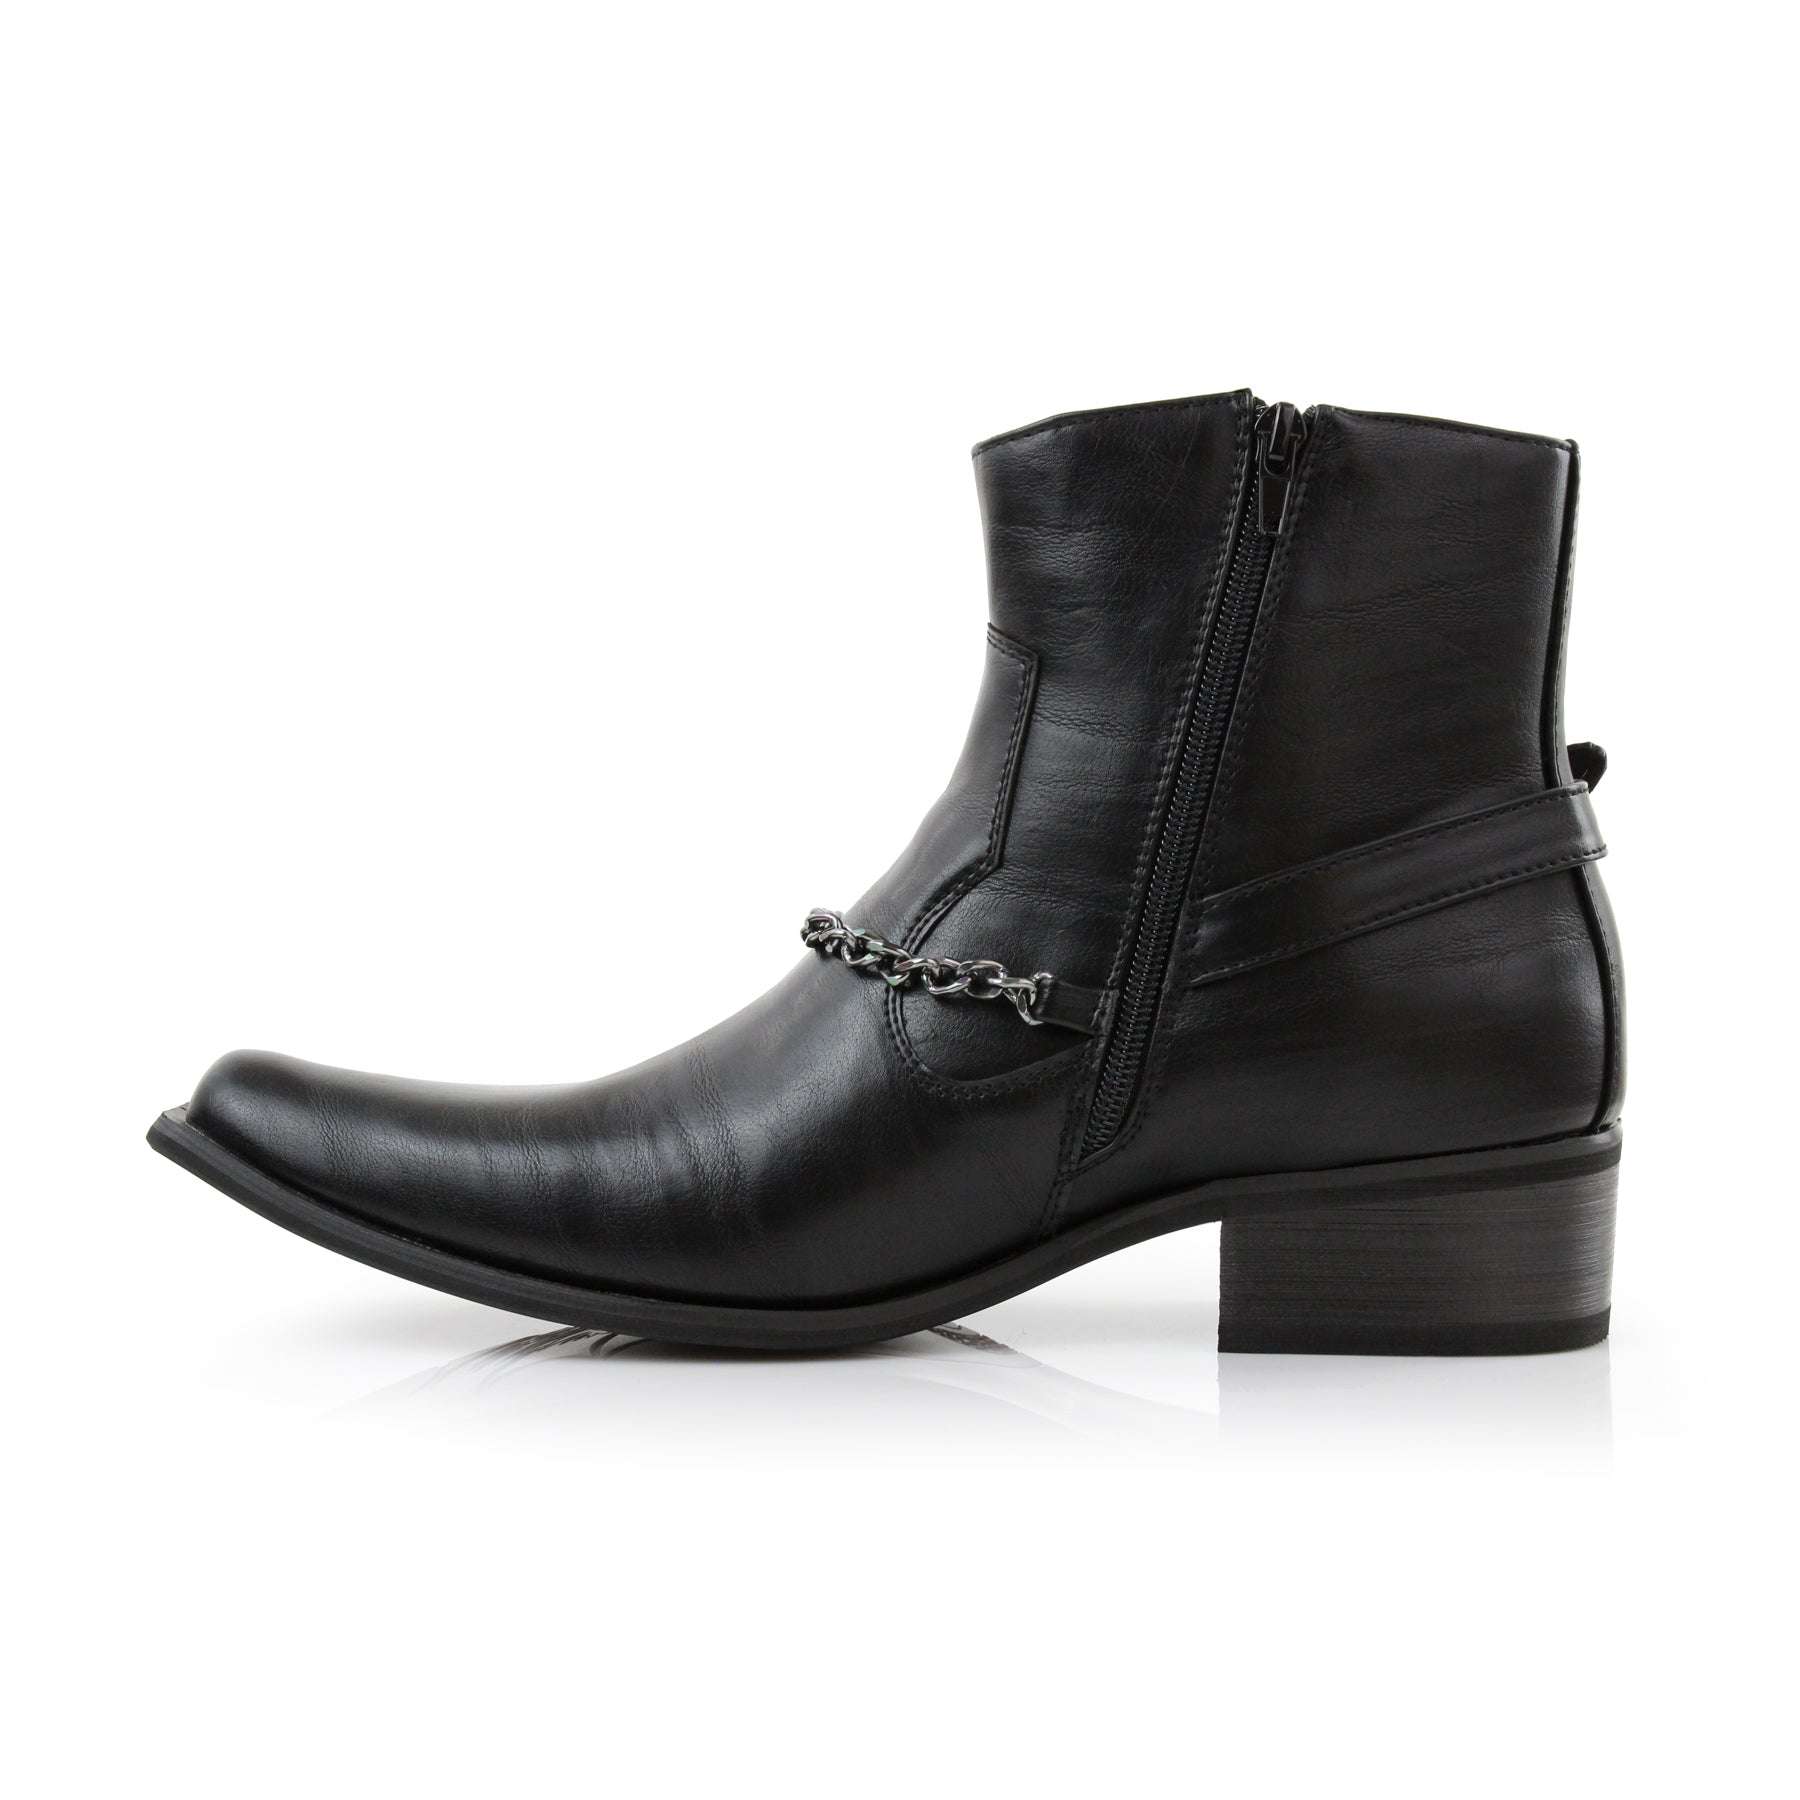 Faux Leather Cowboy Boots | Reyes by Ferro Aldo | Conal Footwear | Inner Side Angle View